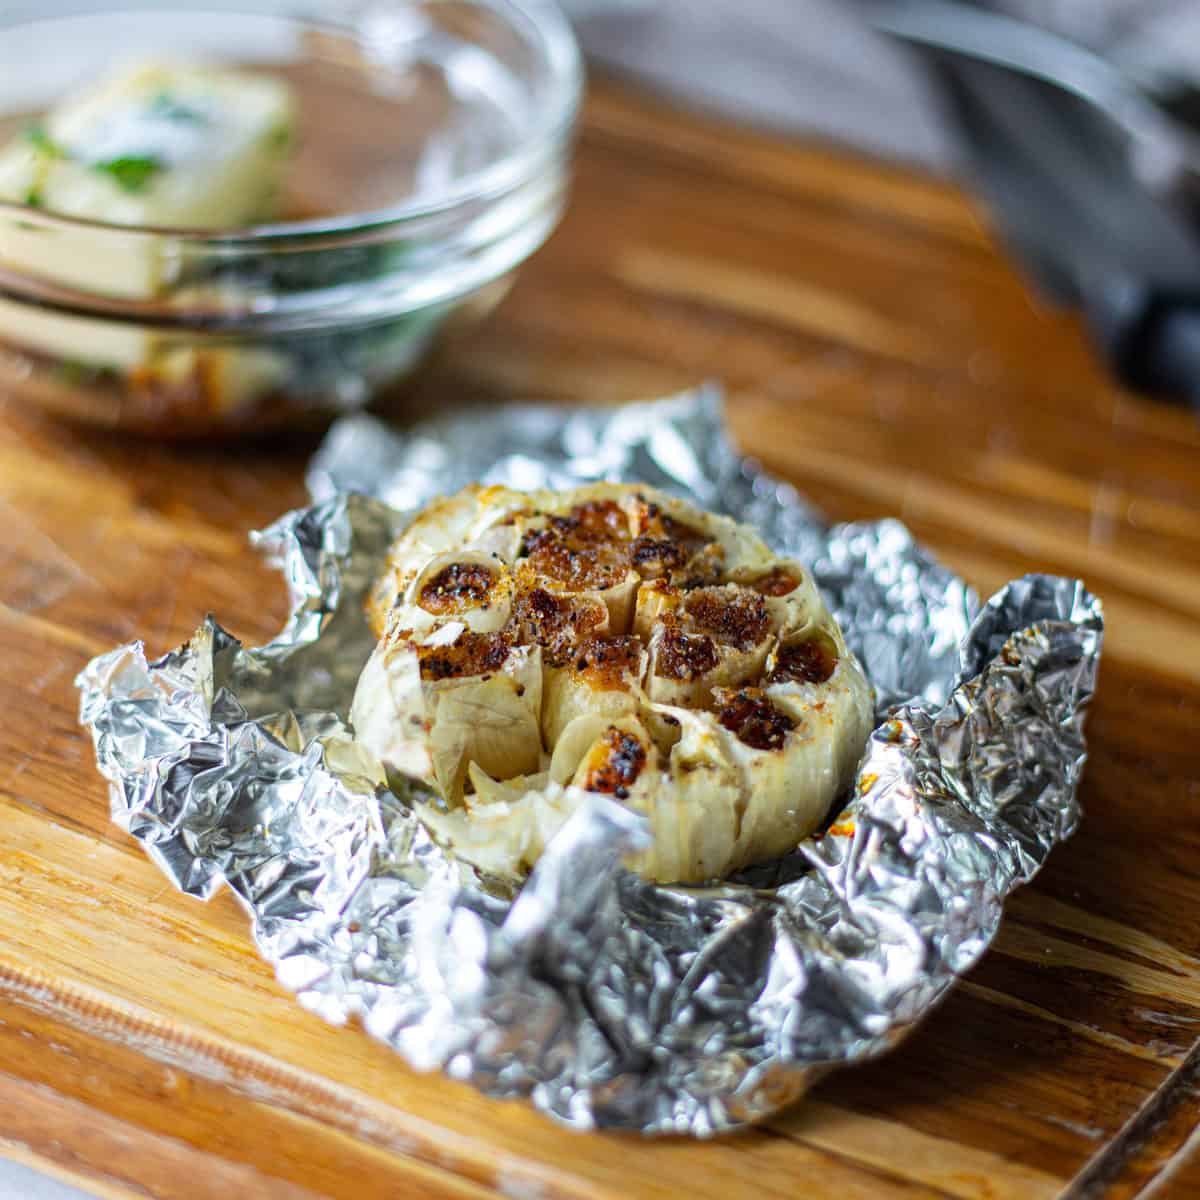 A head of garlic is shown after roasting on the grill in tin foil pulled back.